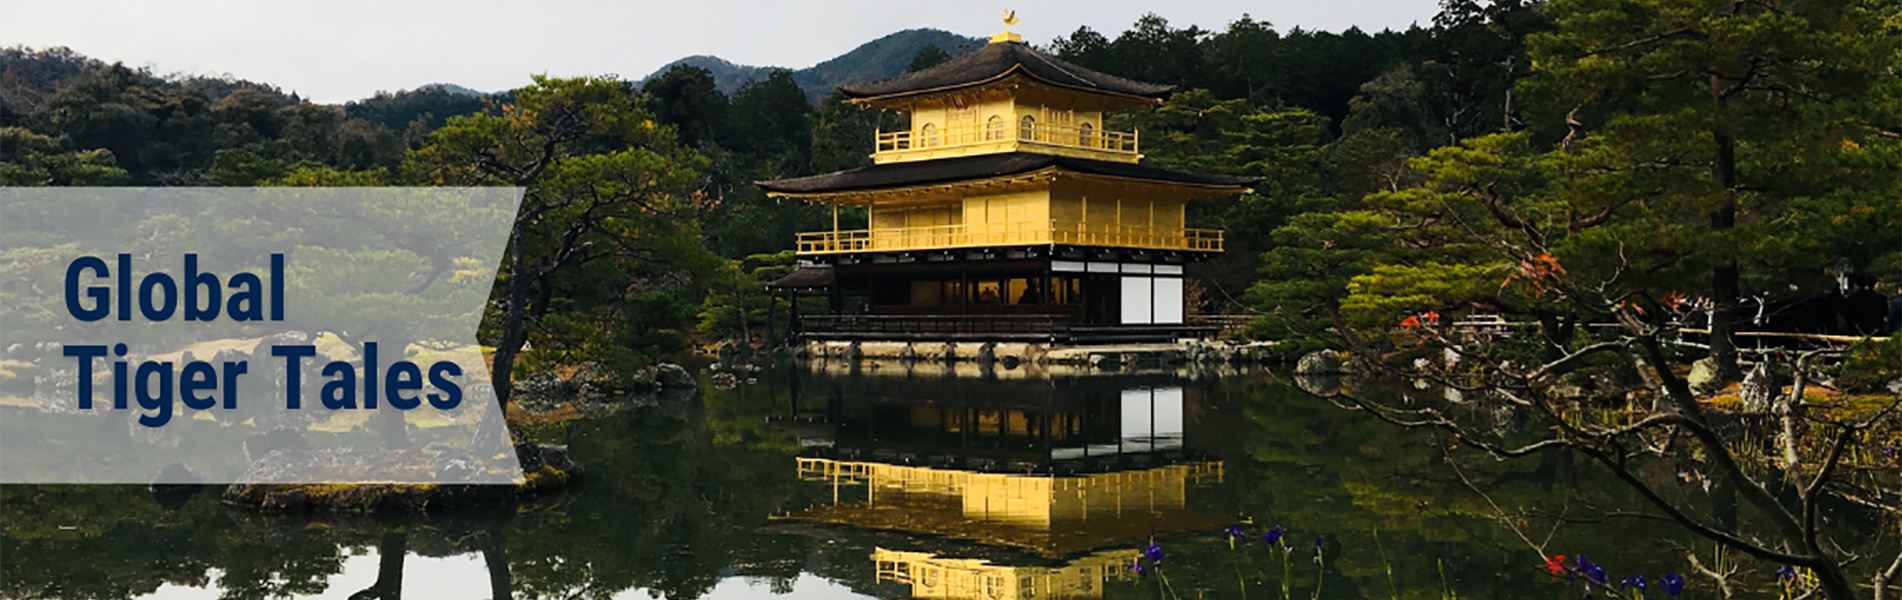 Global Tiger Tales - image of lakeside house with asian architecture on the bank and reflected in the water